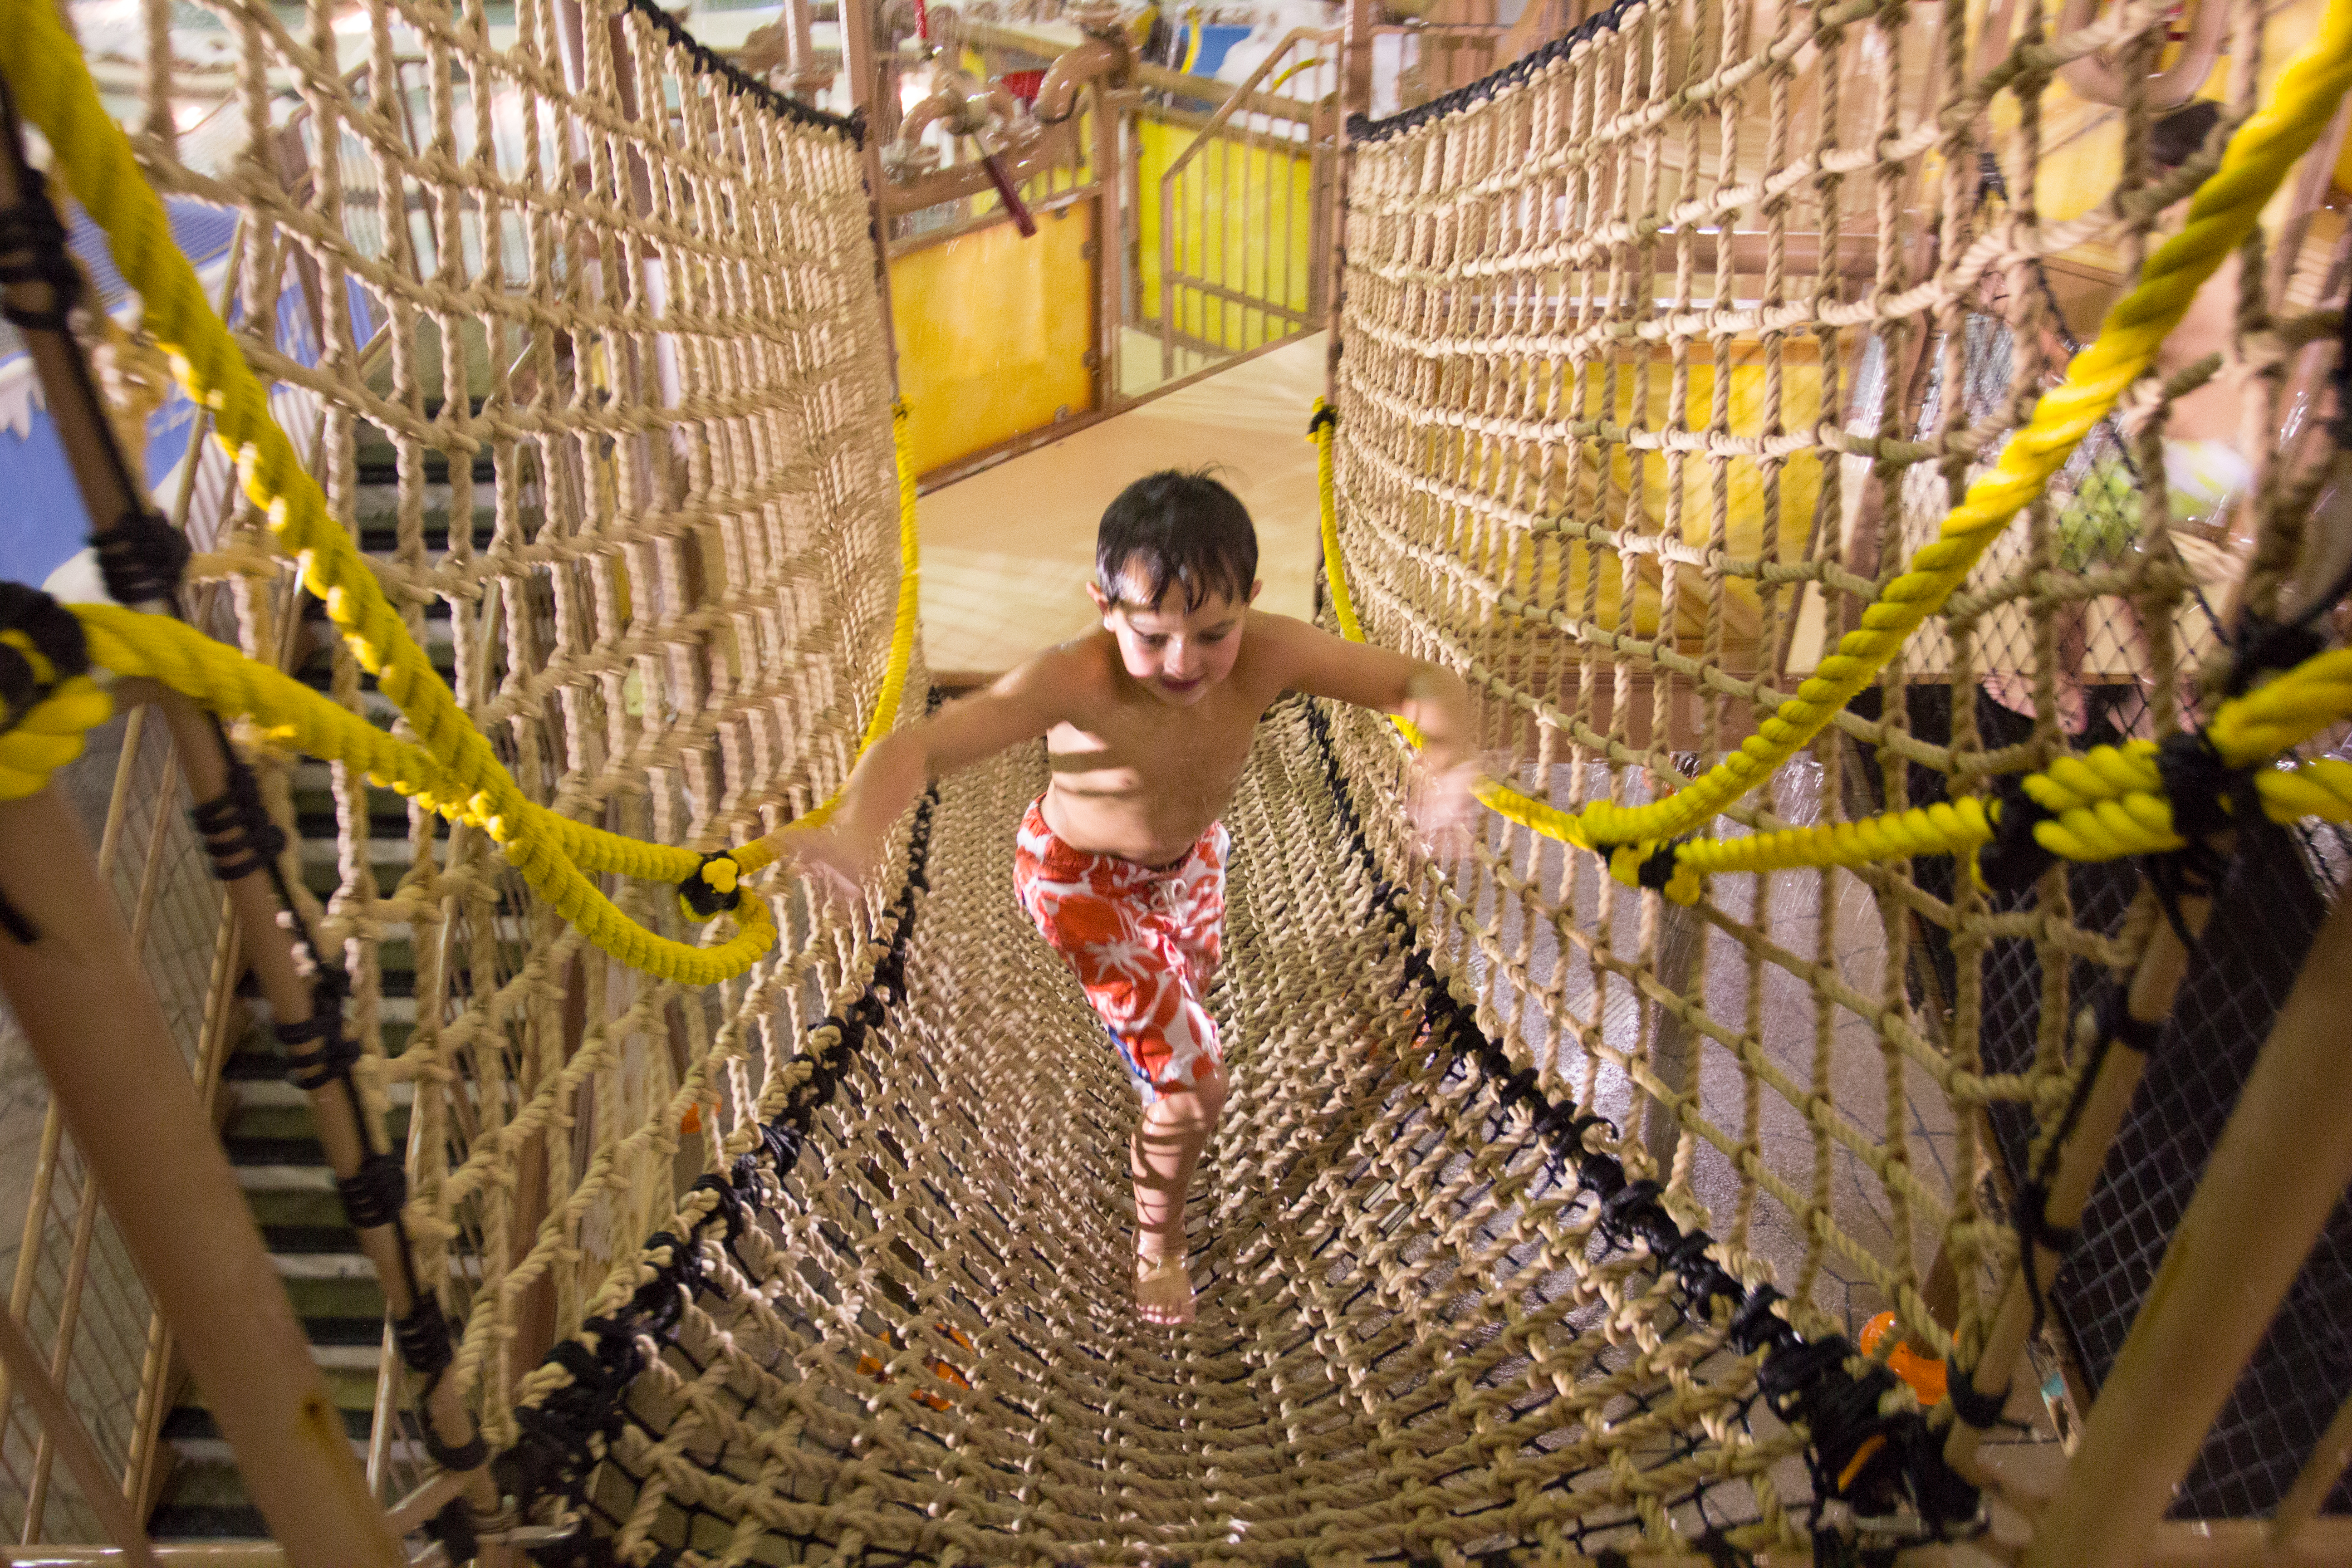 These water parks to visit with kids in the US are awesome, and definitely on our bucket list!